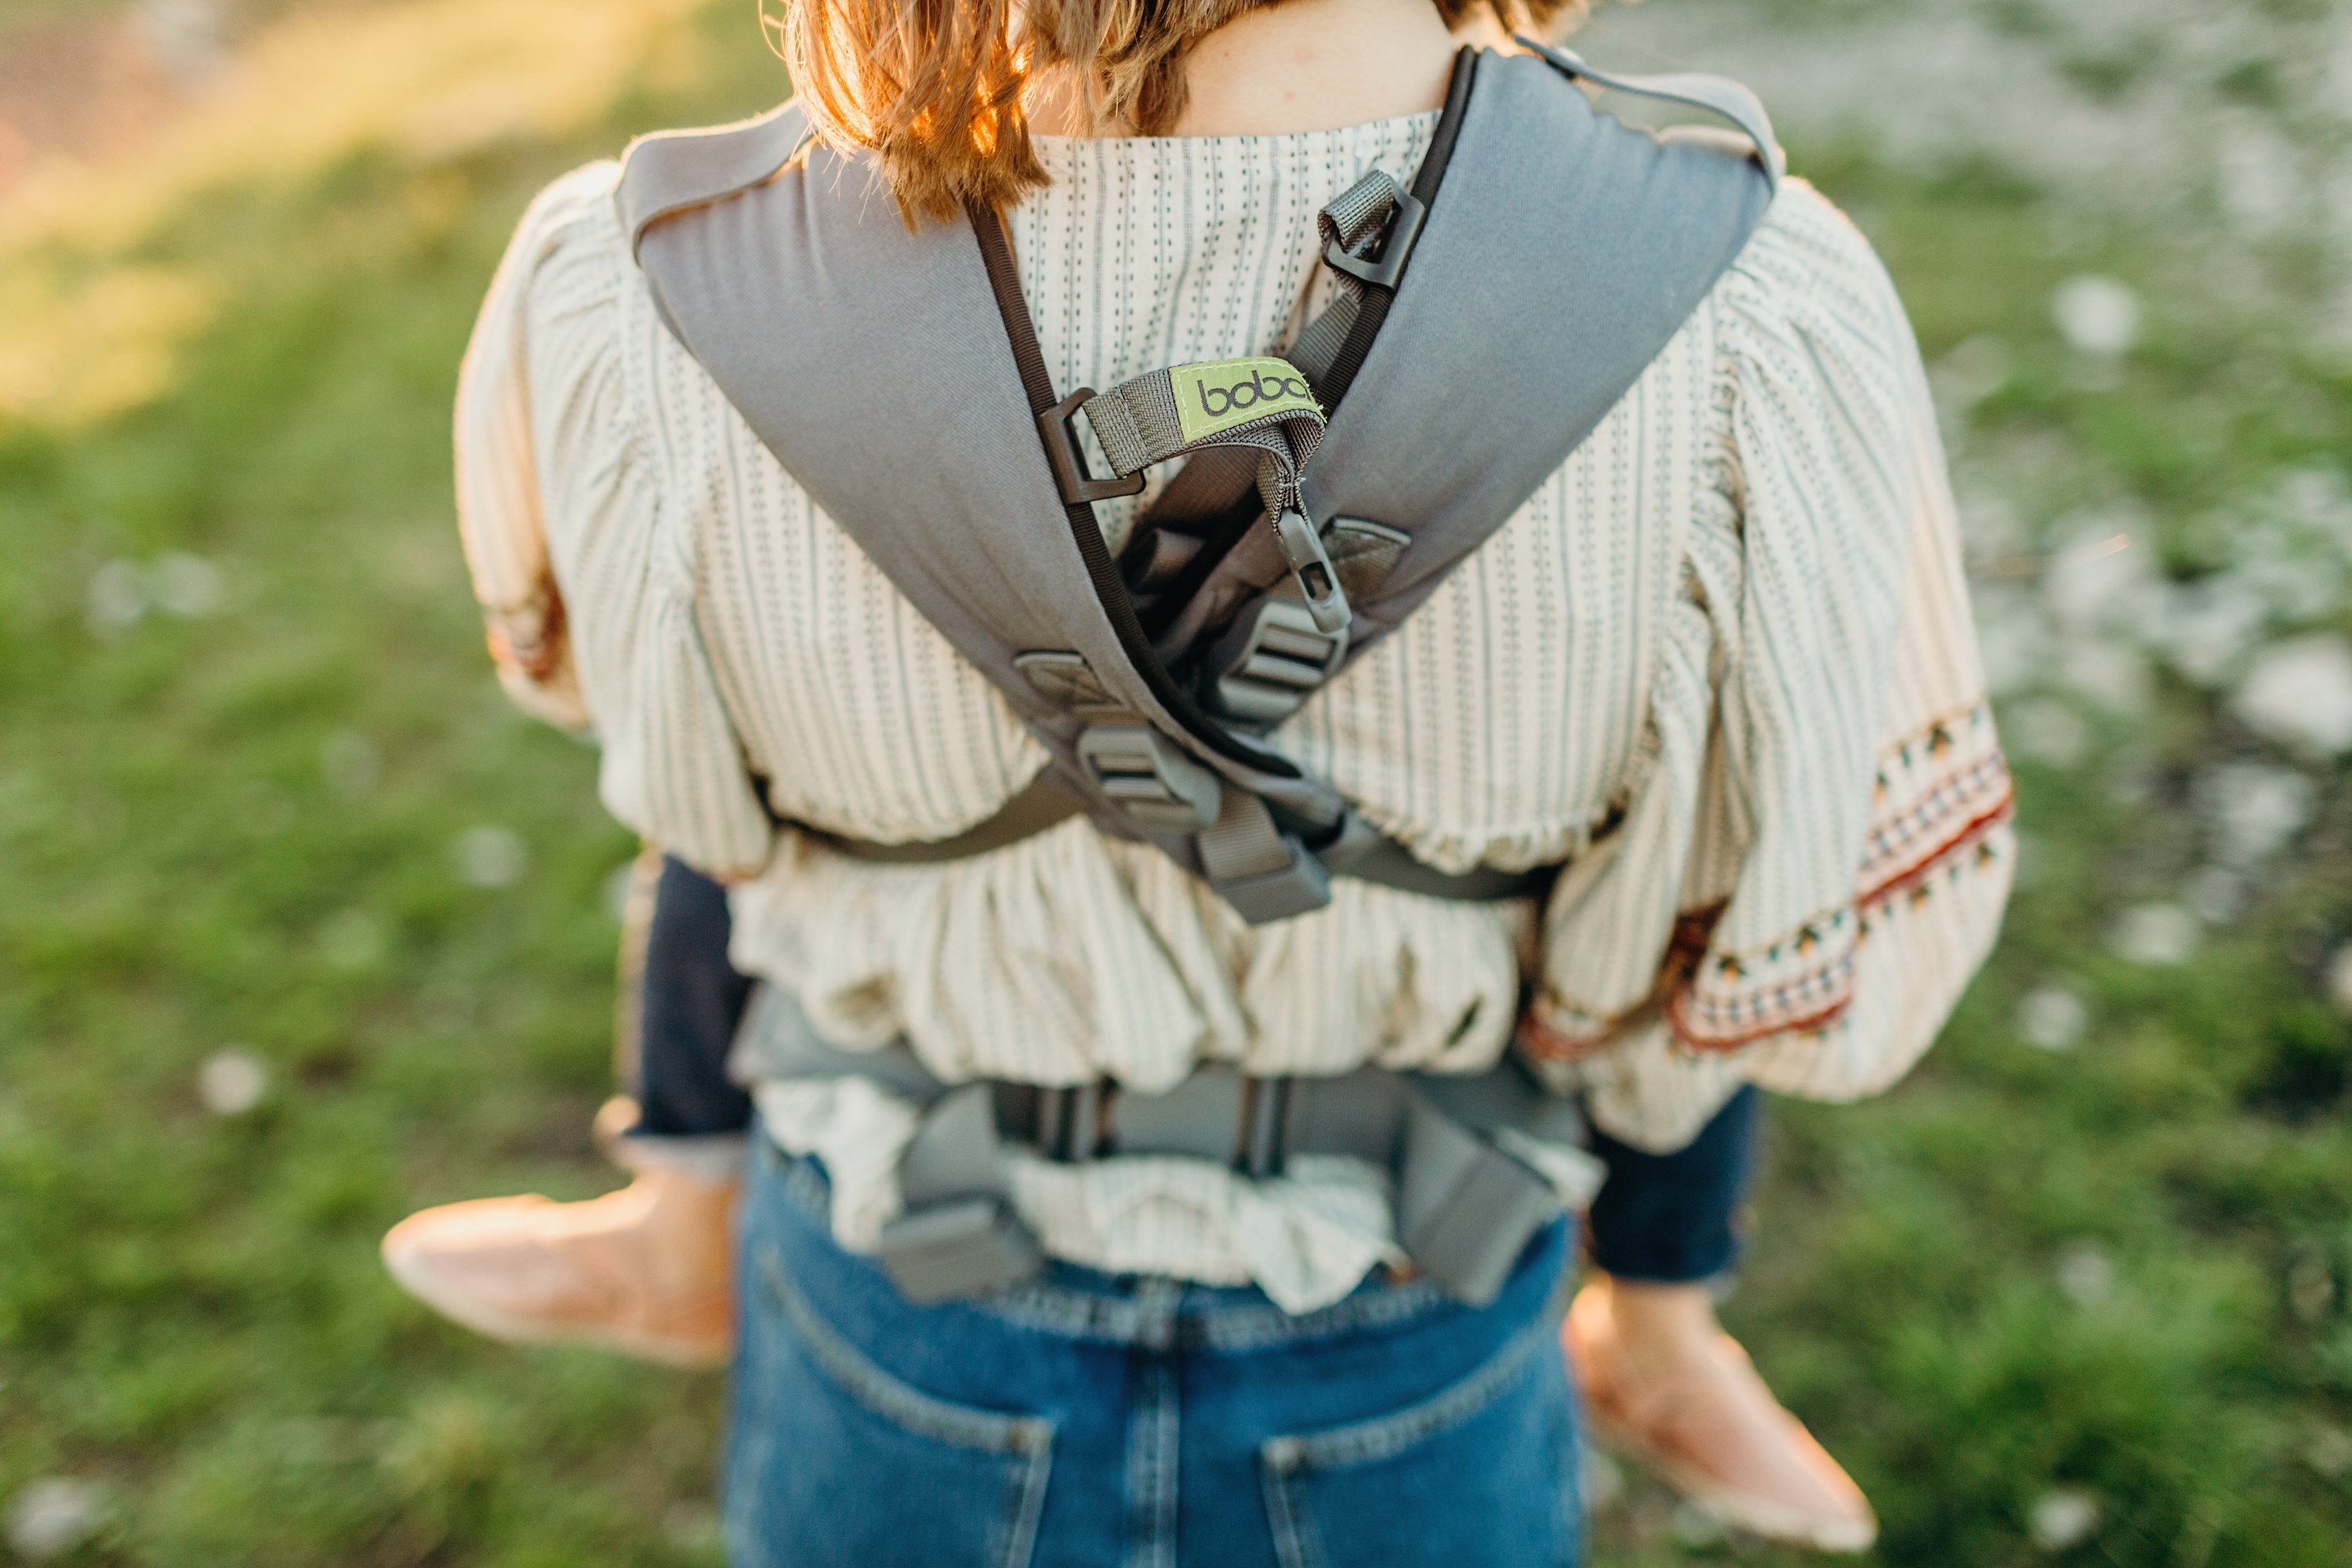 Woman wearing her baby with a crossed straps variaton of the front carry in the gray boba x baby carrier.